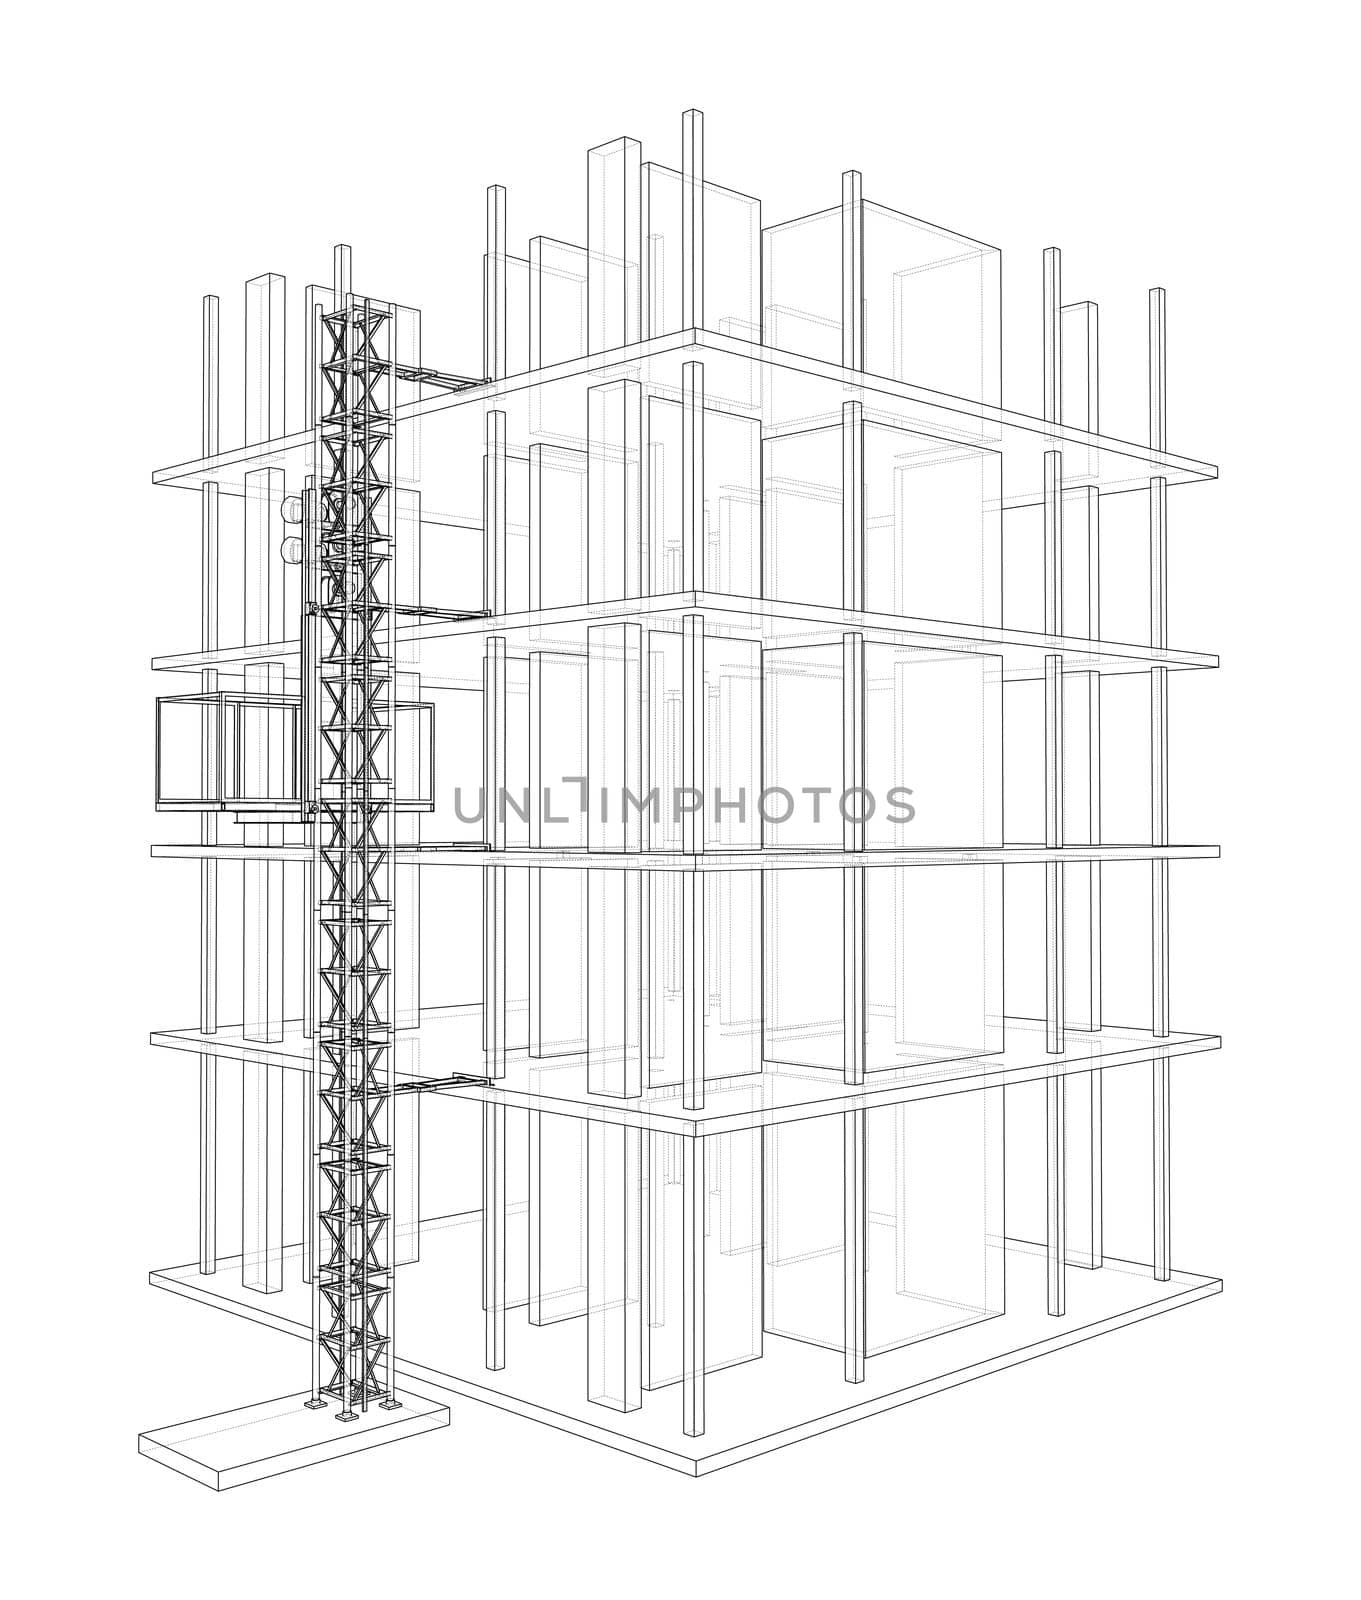 Building under construction with a mast lifts outline. 3d illustration